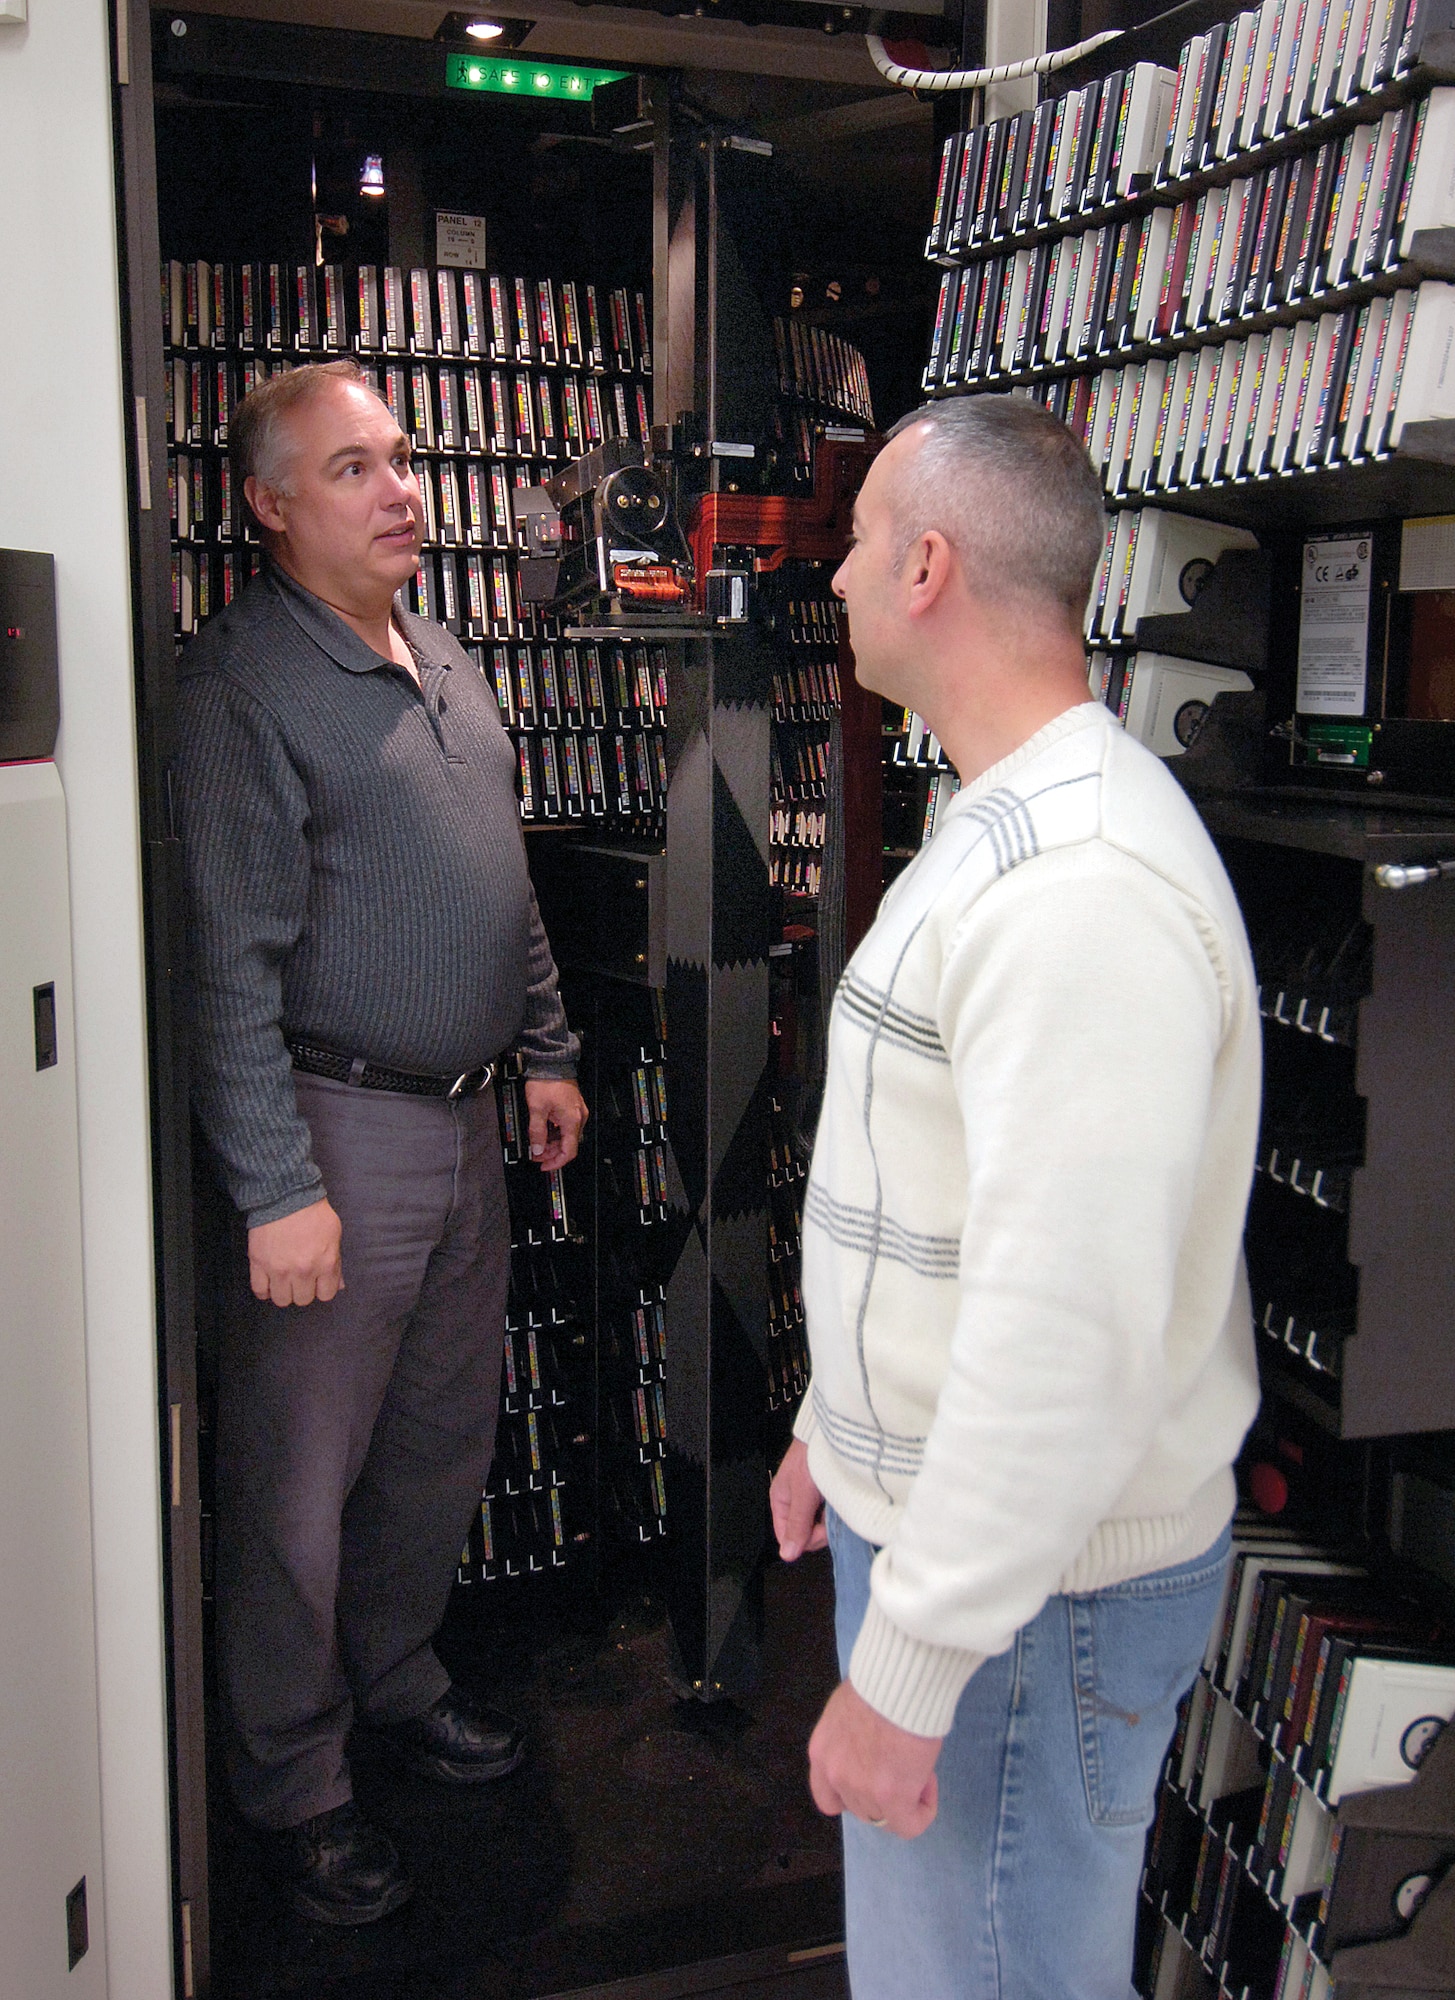 System analysts Chris Hollis, left, and Stephen Fischer, are surrounded by approximately 5,500 computer tapes inside a round library storage module operated by robotic arms that pull information when needed. Several of these modules cover the floor in DISA’s main computer room but disks are replacing the 10-year-old tape storage technology. DISA professionals anticipate the change within the next year. (Air Force photo by Margo Wright)